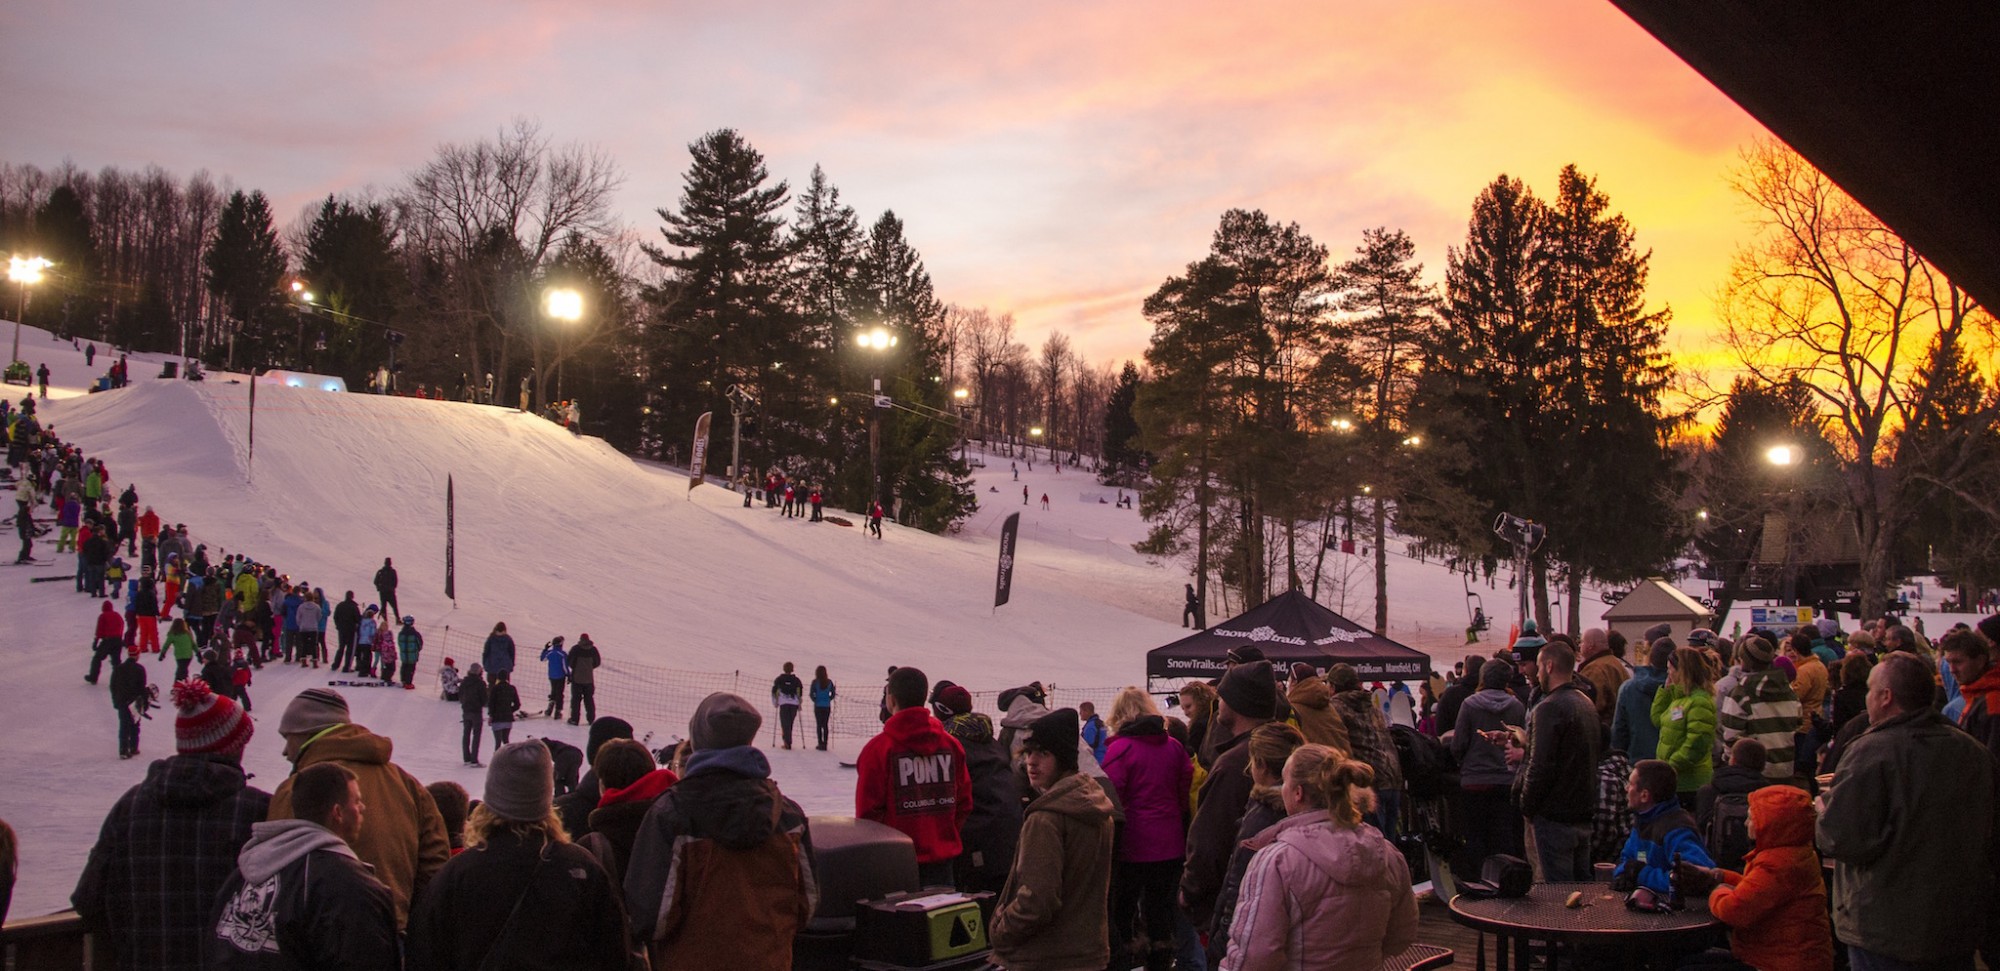 Glimpse of February Events with Big Air this Weekend